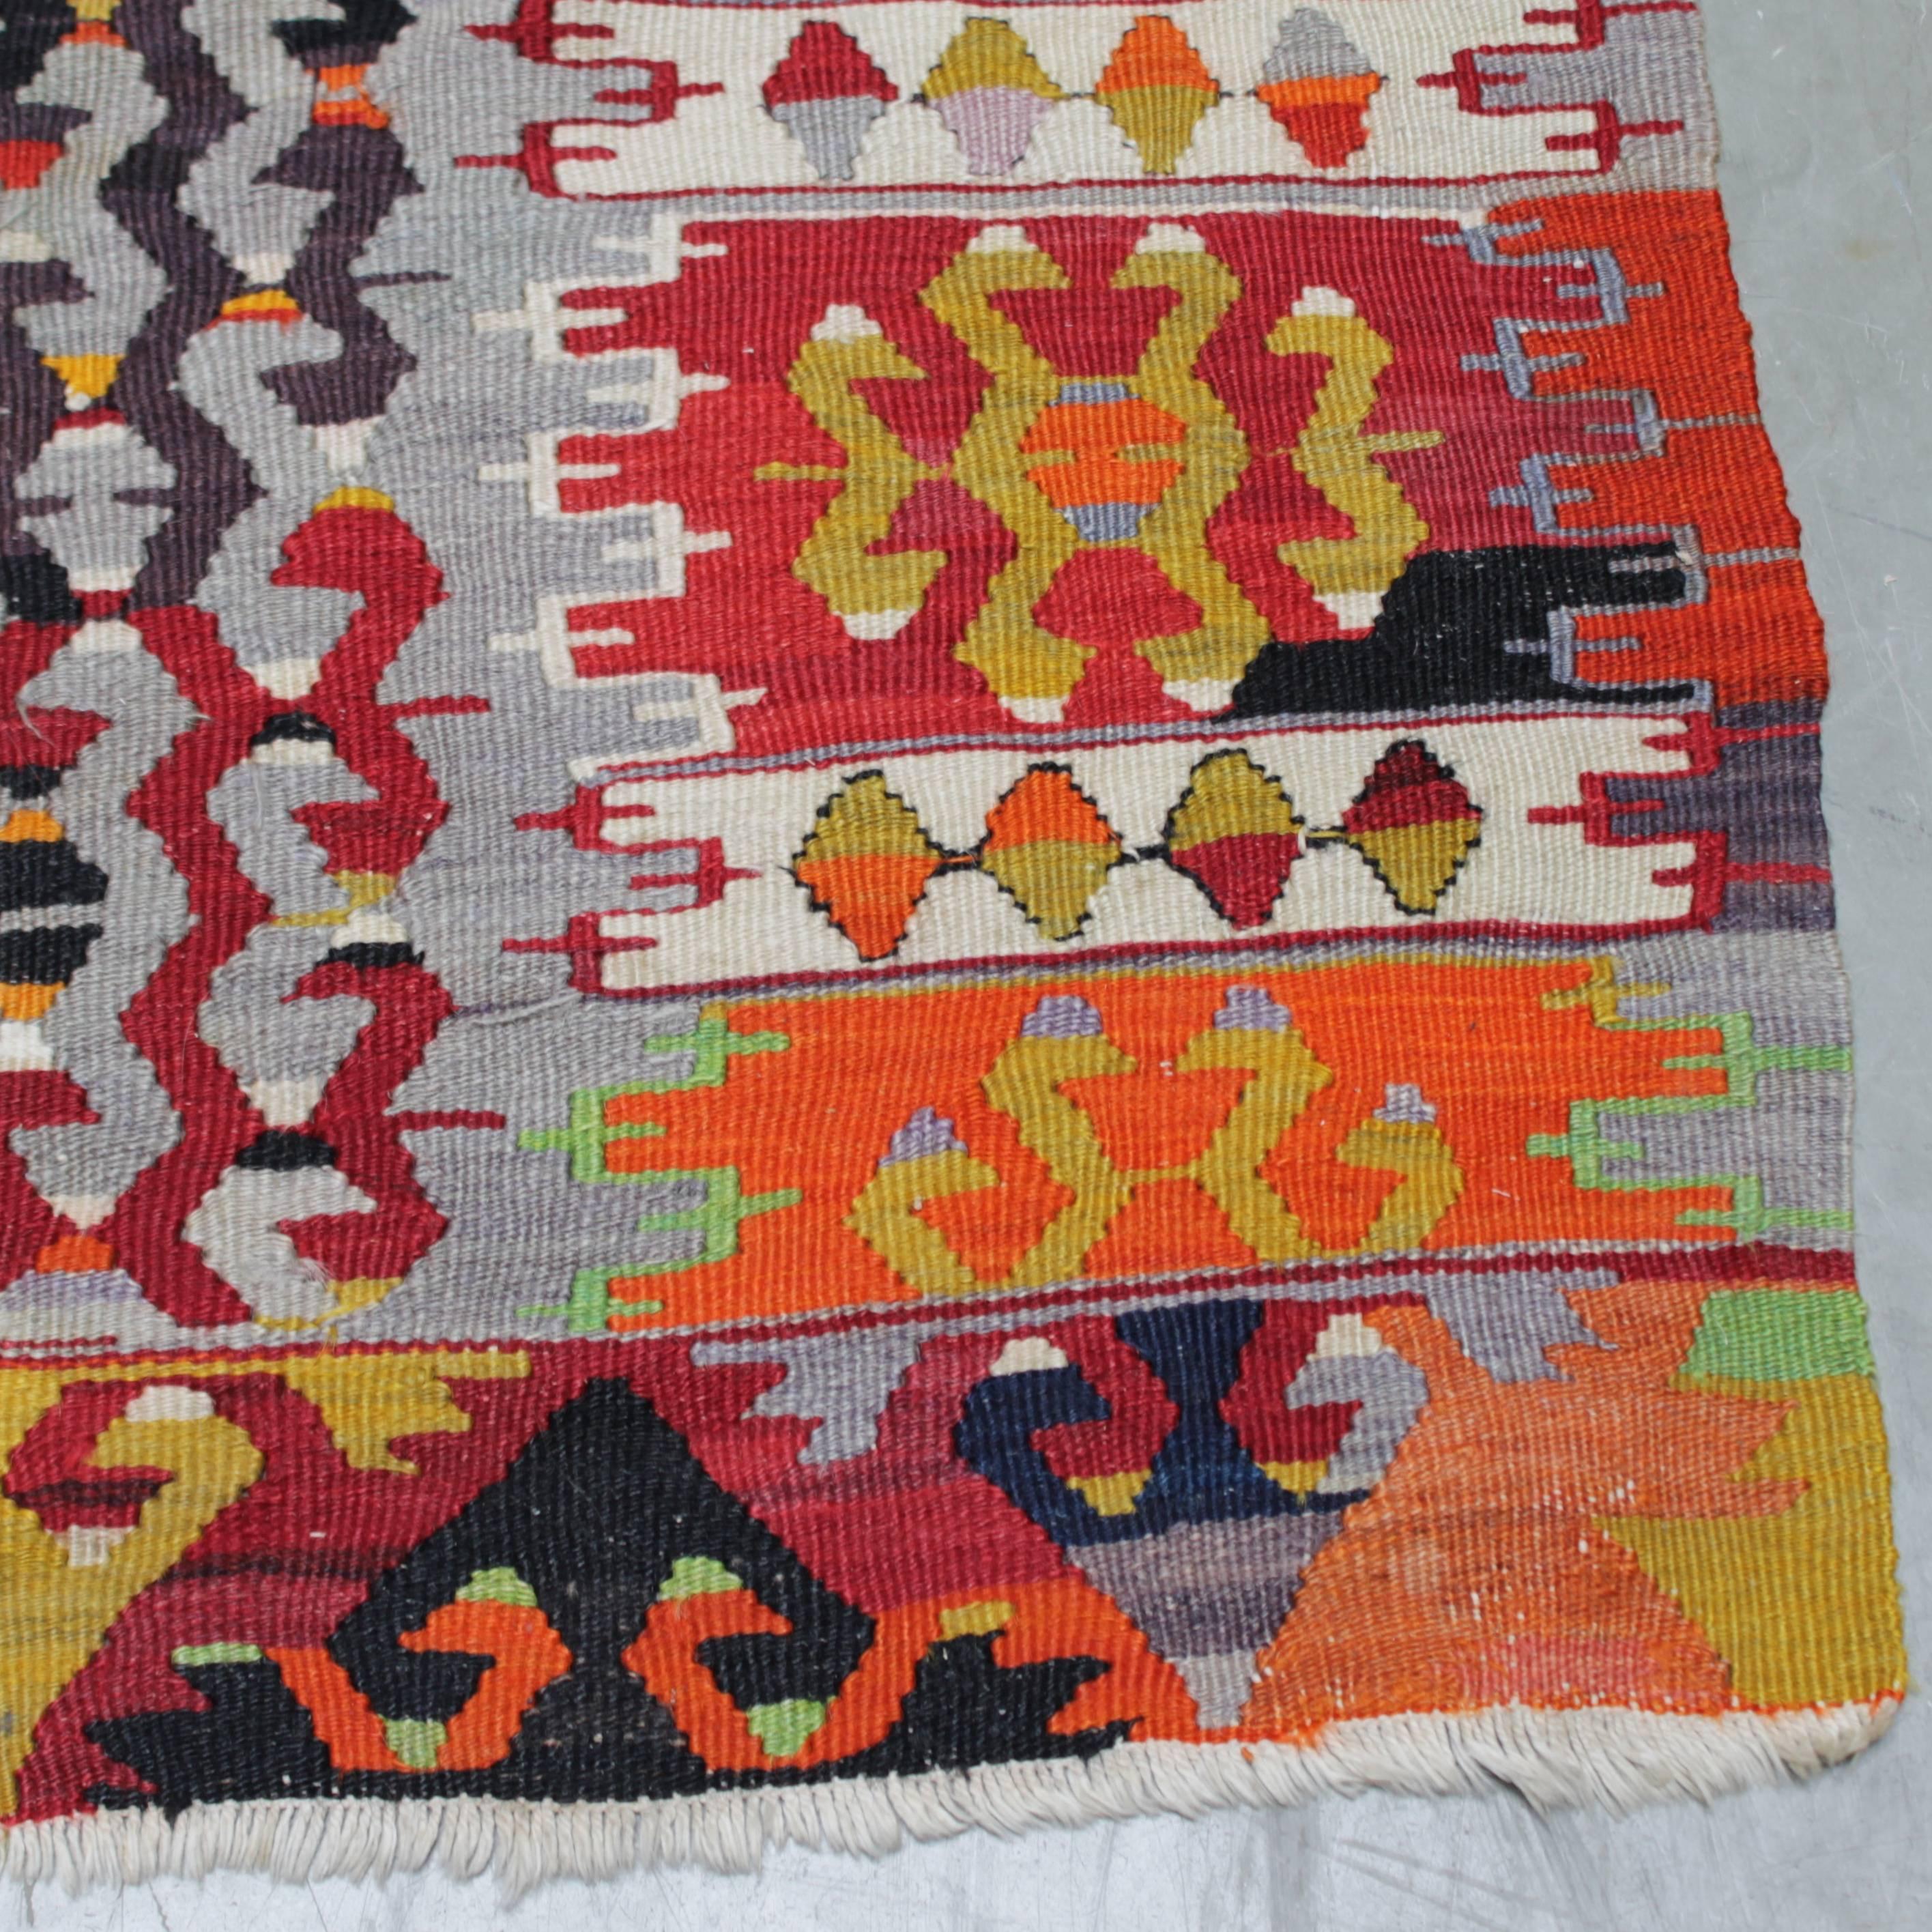 Large colorful vintage Kaysery Cappadocia Kilim, flat-weave rug in a bright multi-color geometric design. Dimensions: 72.8 in. (185 cm) x 98.4 inches (250 cm). Handwoven wool and cotton. Good condition: two small thin and worn spots (see last two